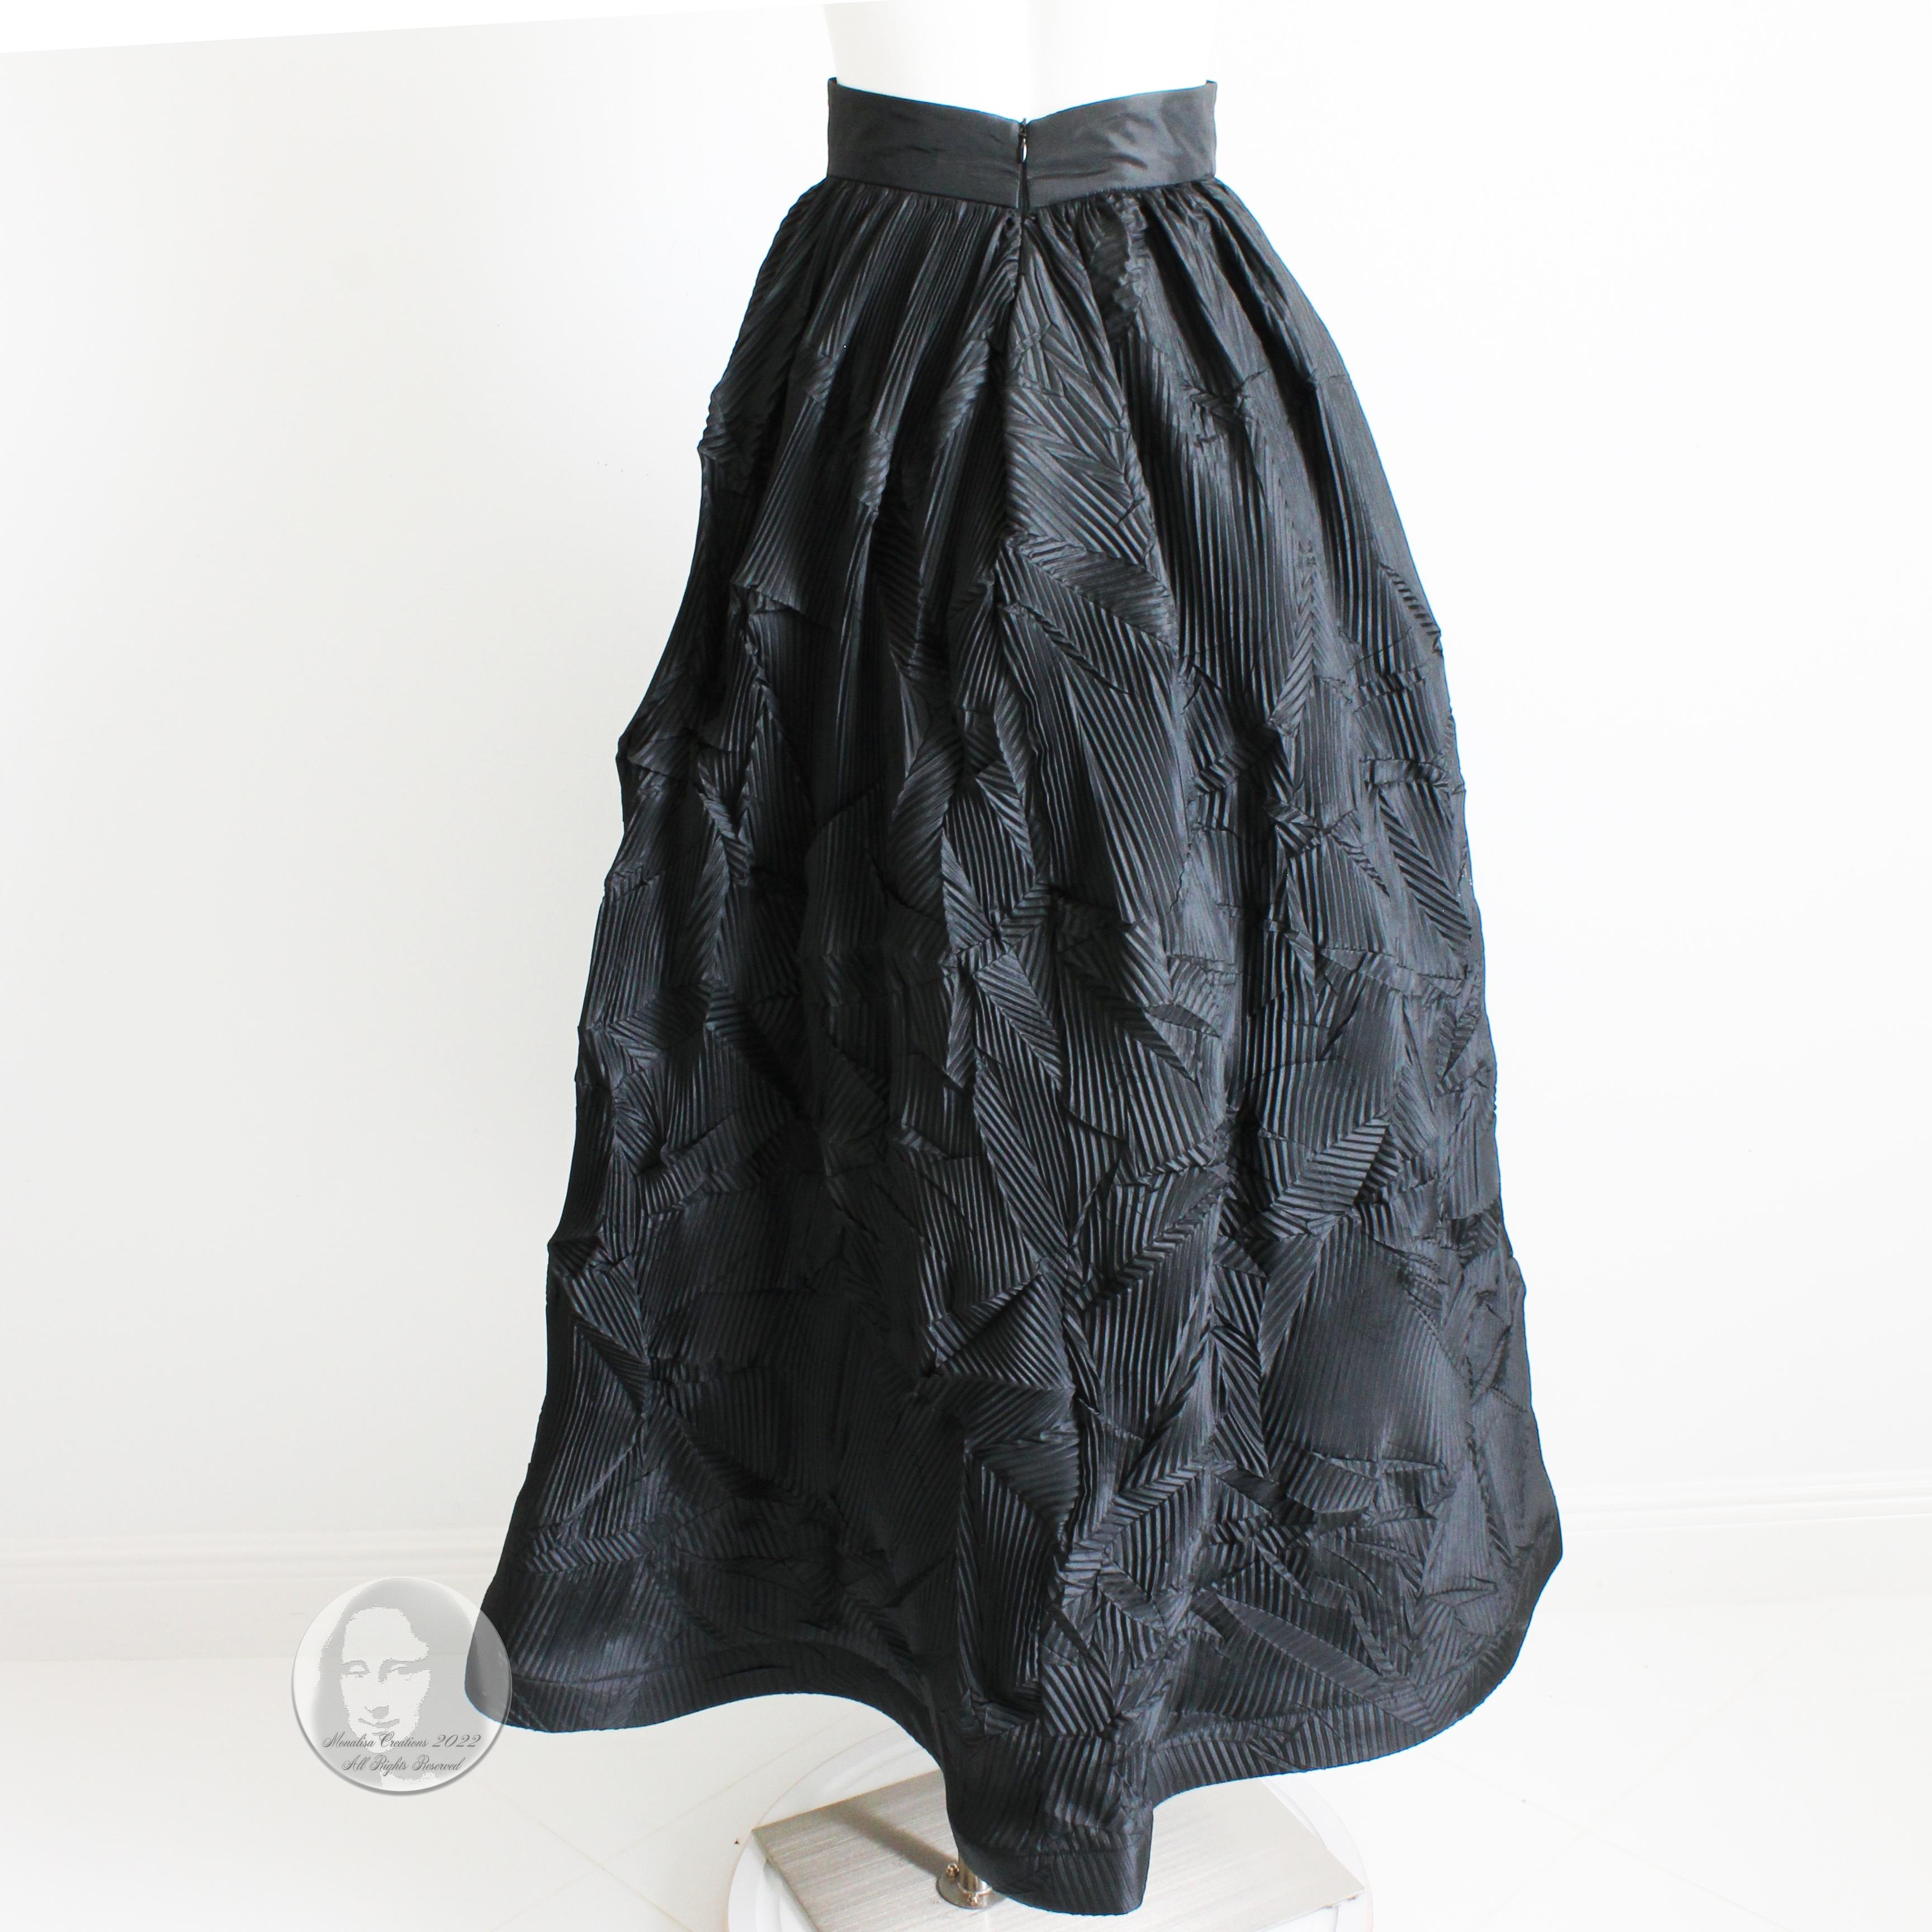 This stunning formal skirt was made by designer Sully Bonnelly (designer for Mizrahi), most likely in the 90s.  Made from what we believe is a rayon blend fabric (no content tags), this piece features TONS of pleats in various patterns throughout!